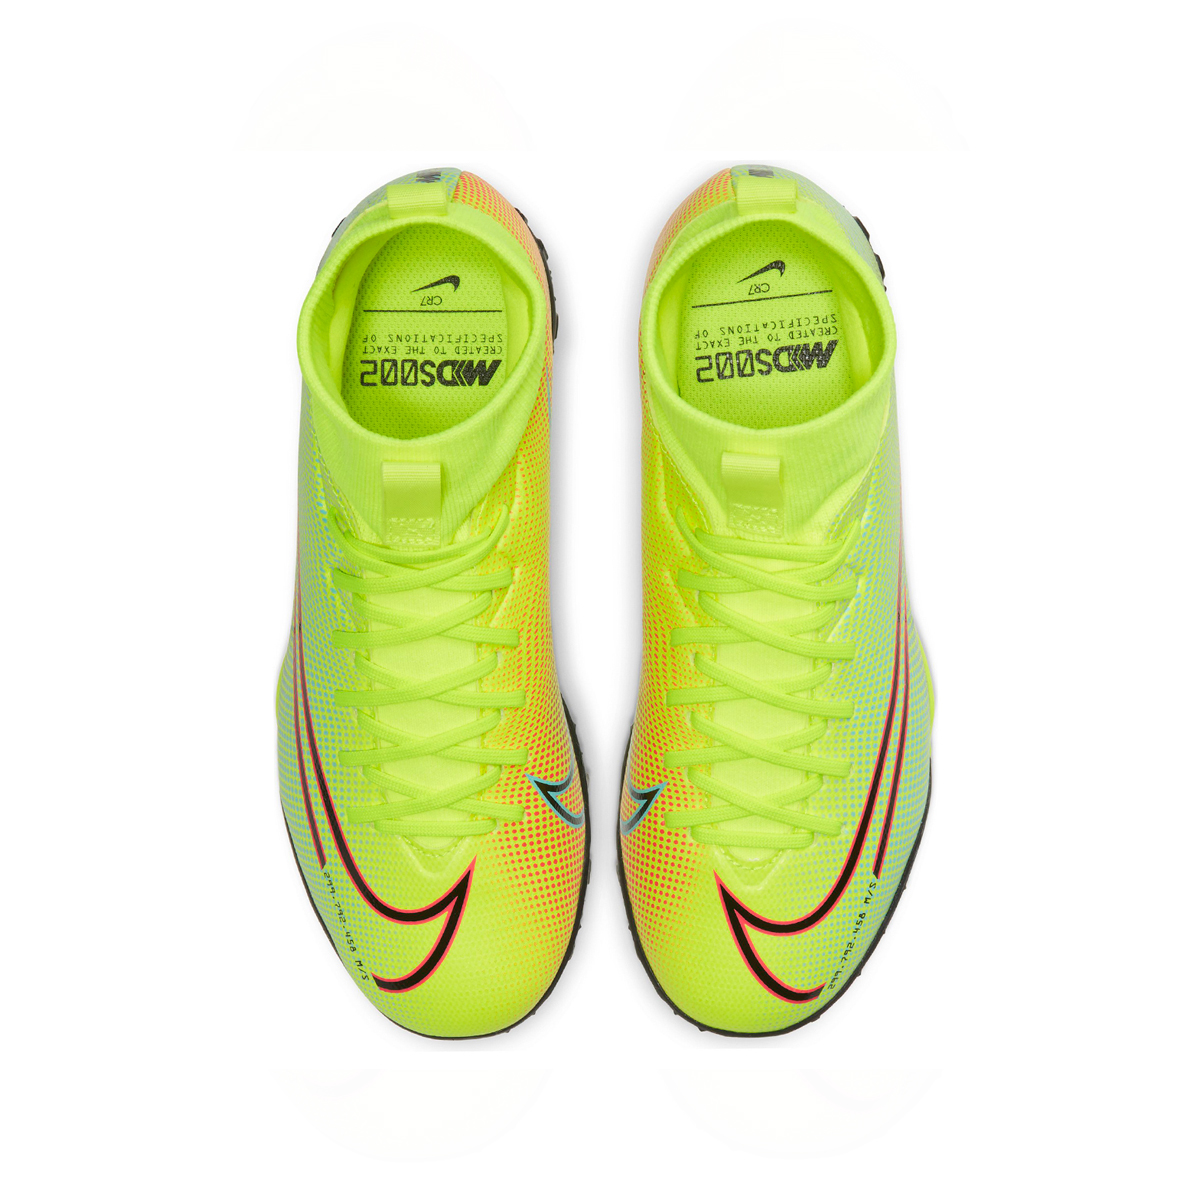 Botines Nike Jr Superfly 7 Academy Mds Tf,  image number null